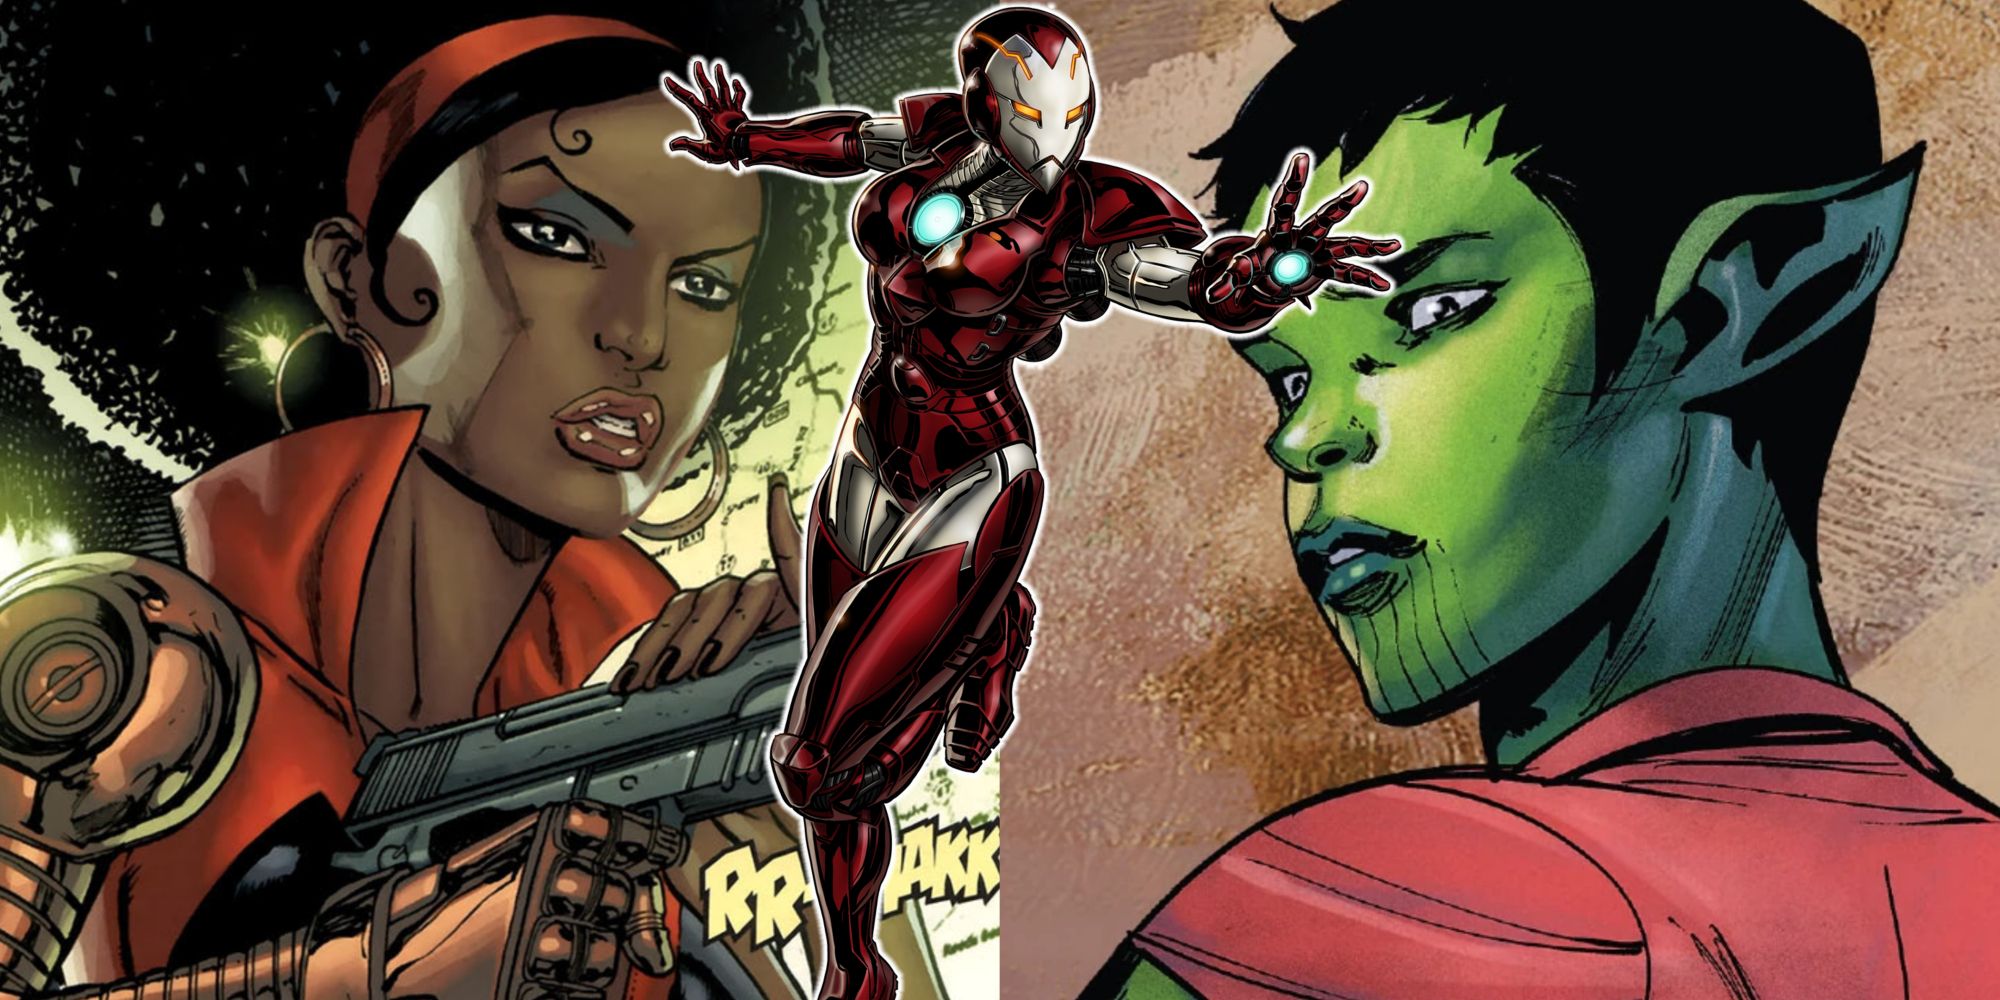 Split image of Misty Knight, Jazinda, and Rescue in Marvel Comics